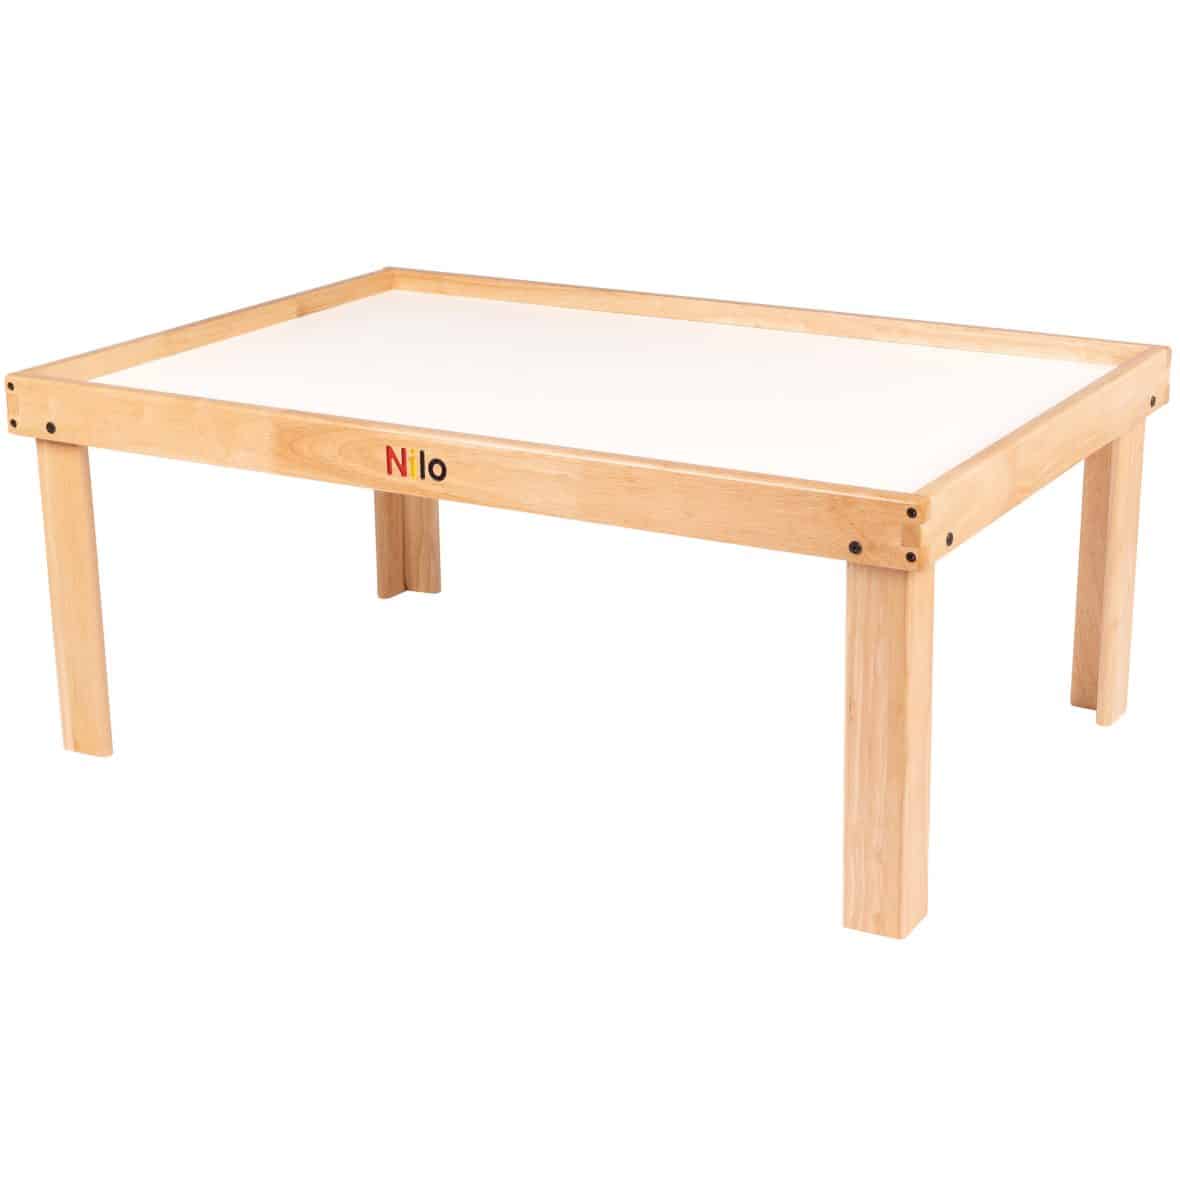 toddler table for kids, kids table, kids play table, activity table for kids, play tables, playing table, toy table for children, toy table for kids, best toy table, best play table